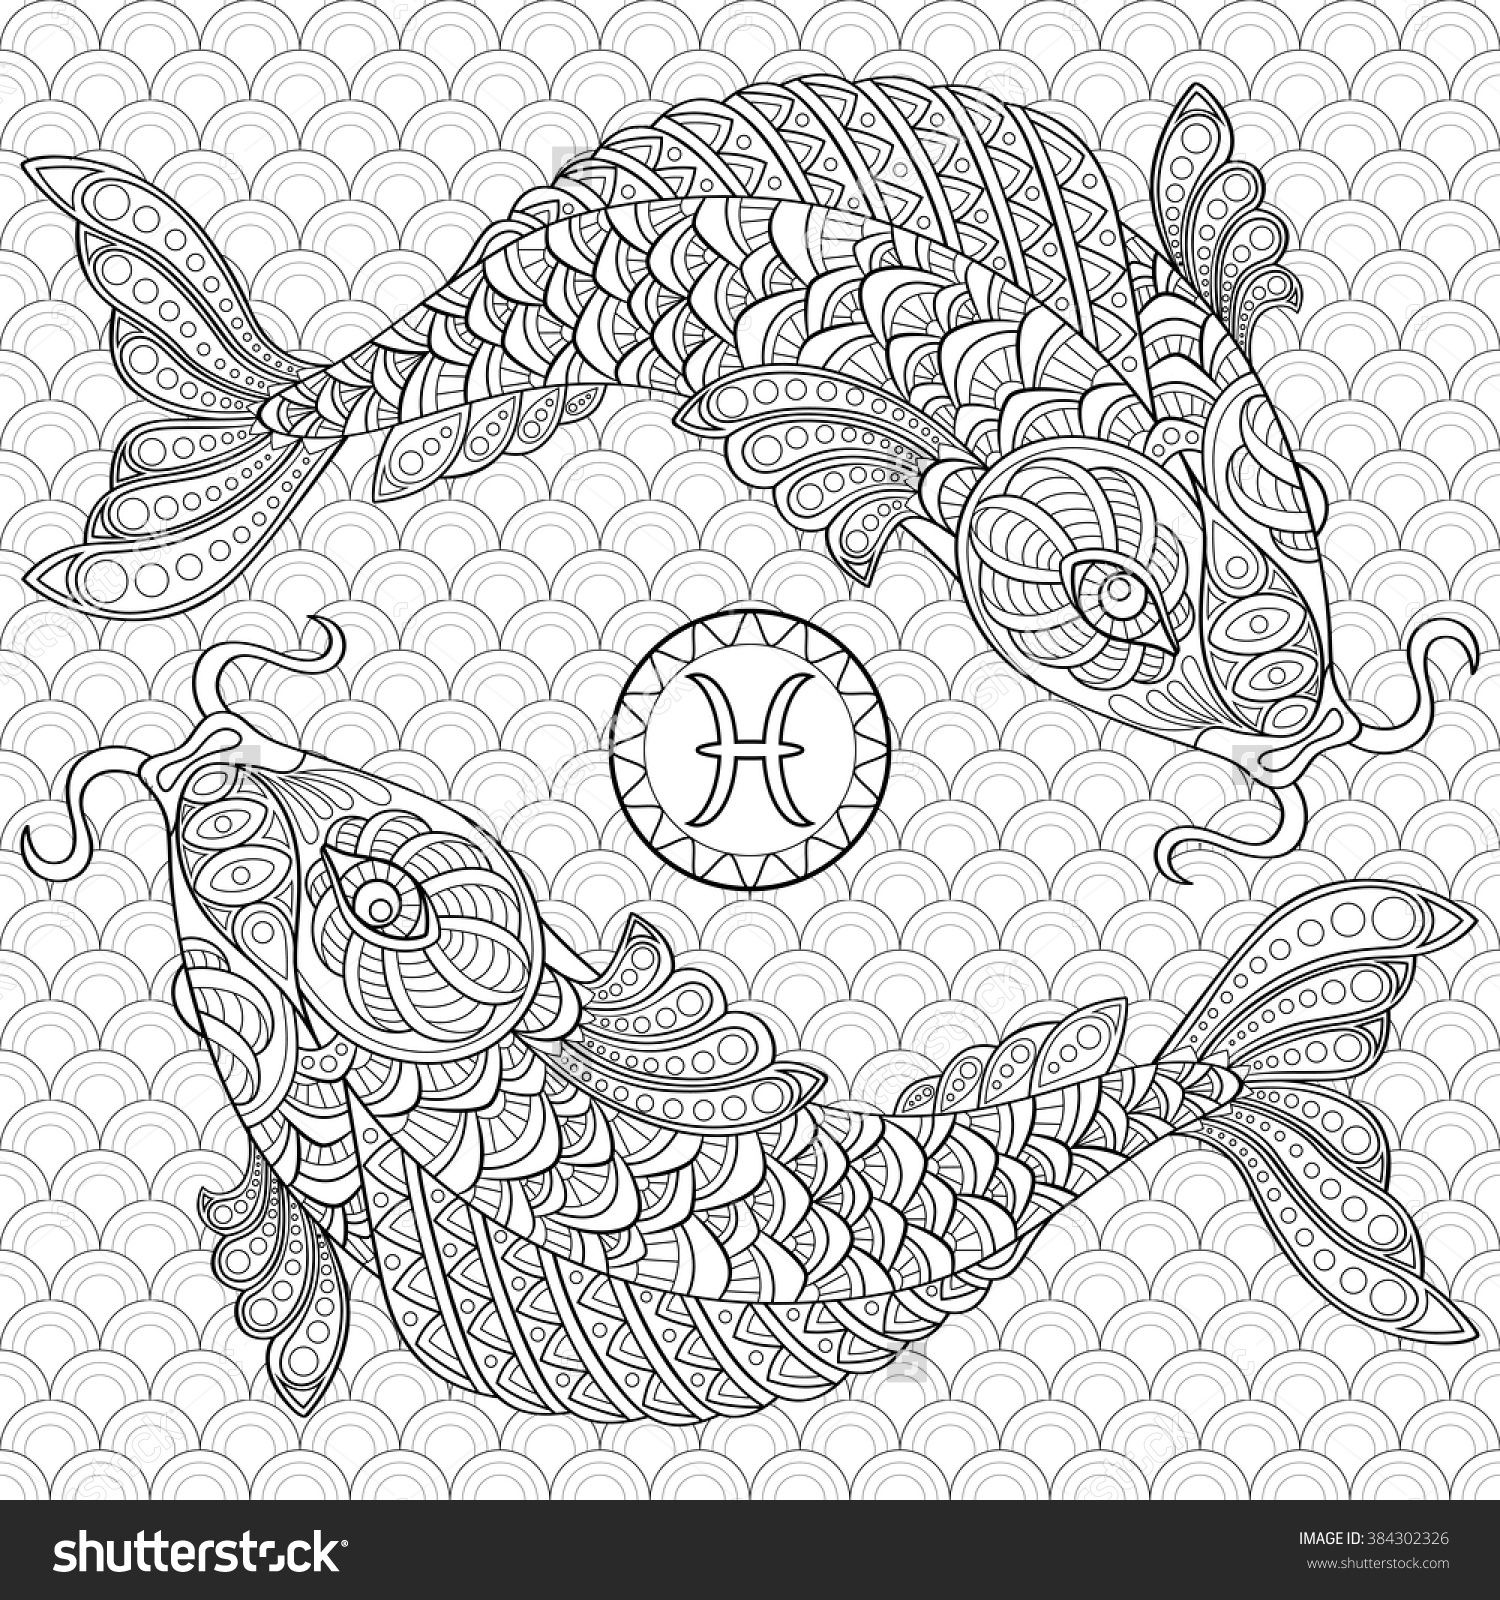 Pisces Coloring Pages at GetColorings.com | Free printable colorings